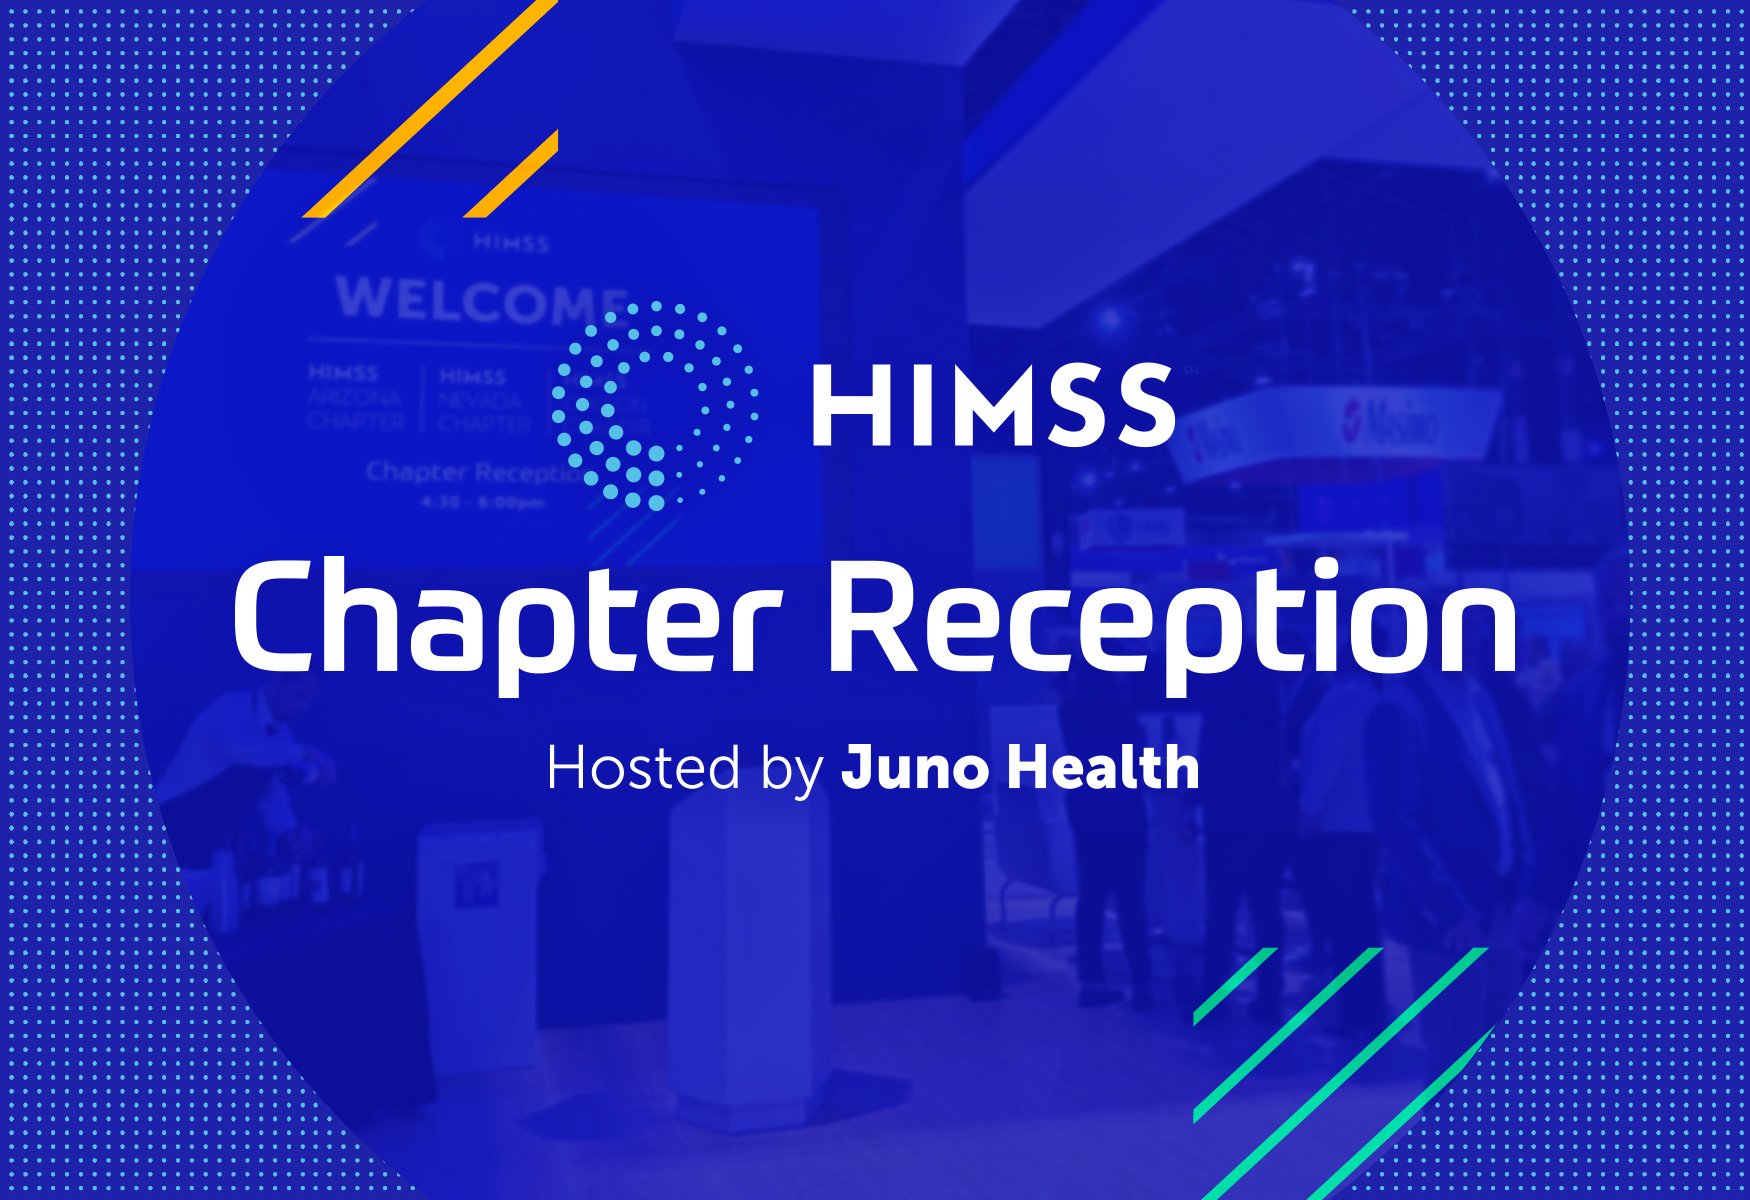 HIMSS24 Chapter reception on blue image of Juno Health's HIMSS 24 booth